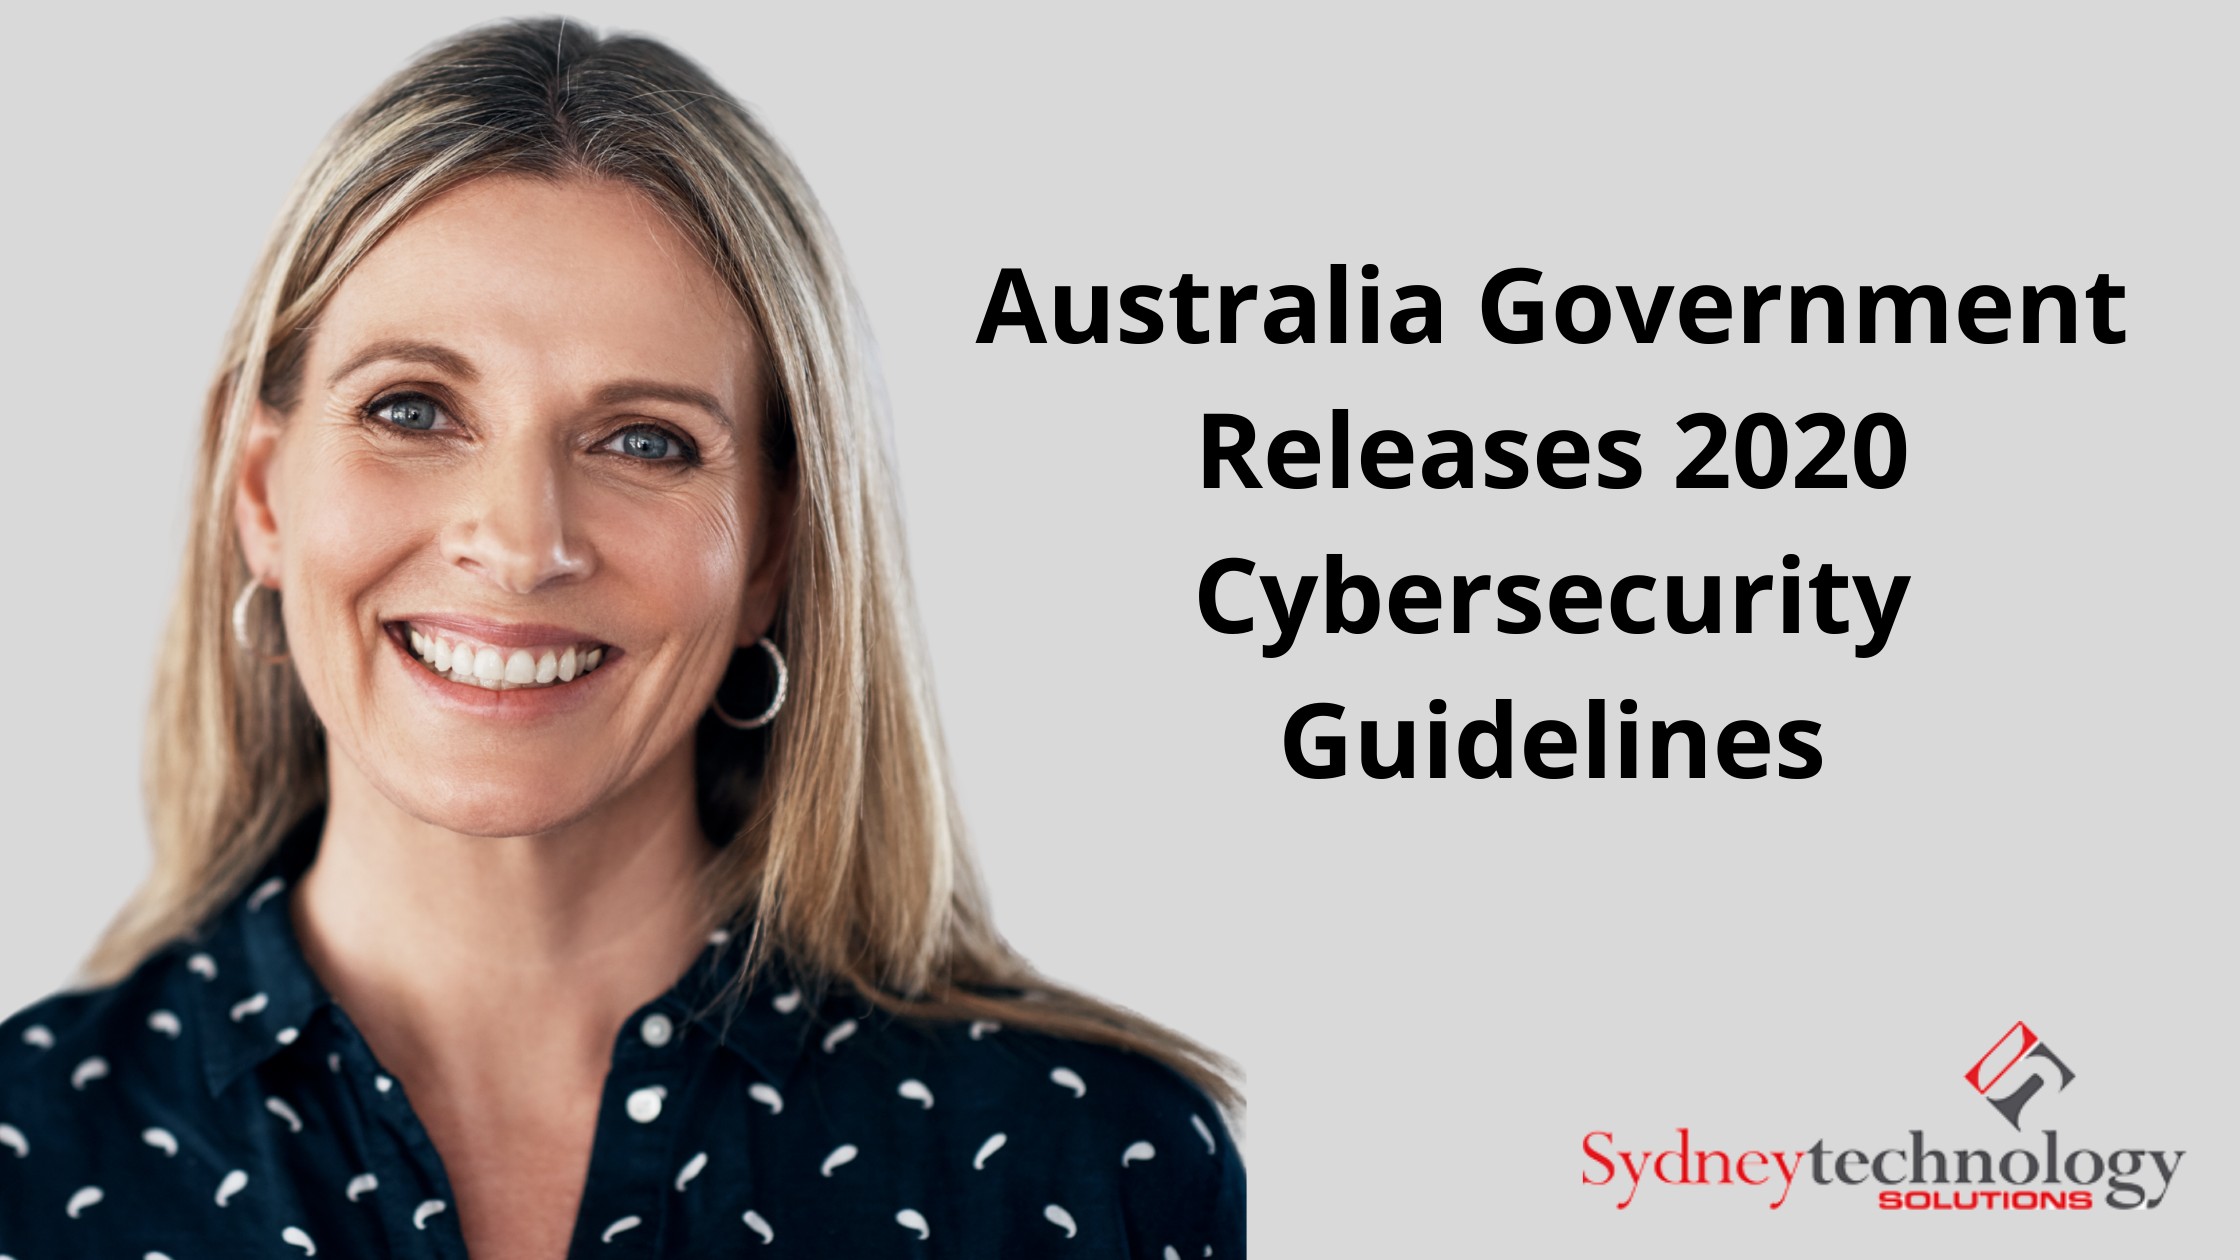 Australia Government Releases 2020 Cybersecurity Guidelines